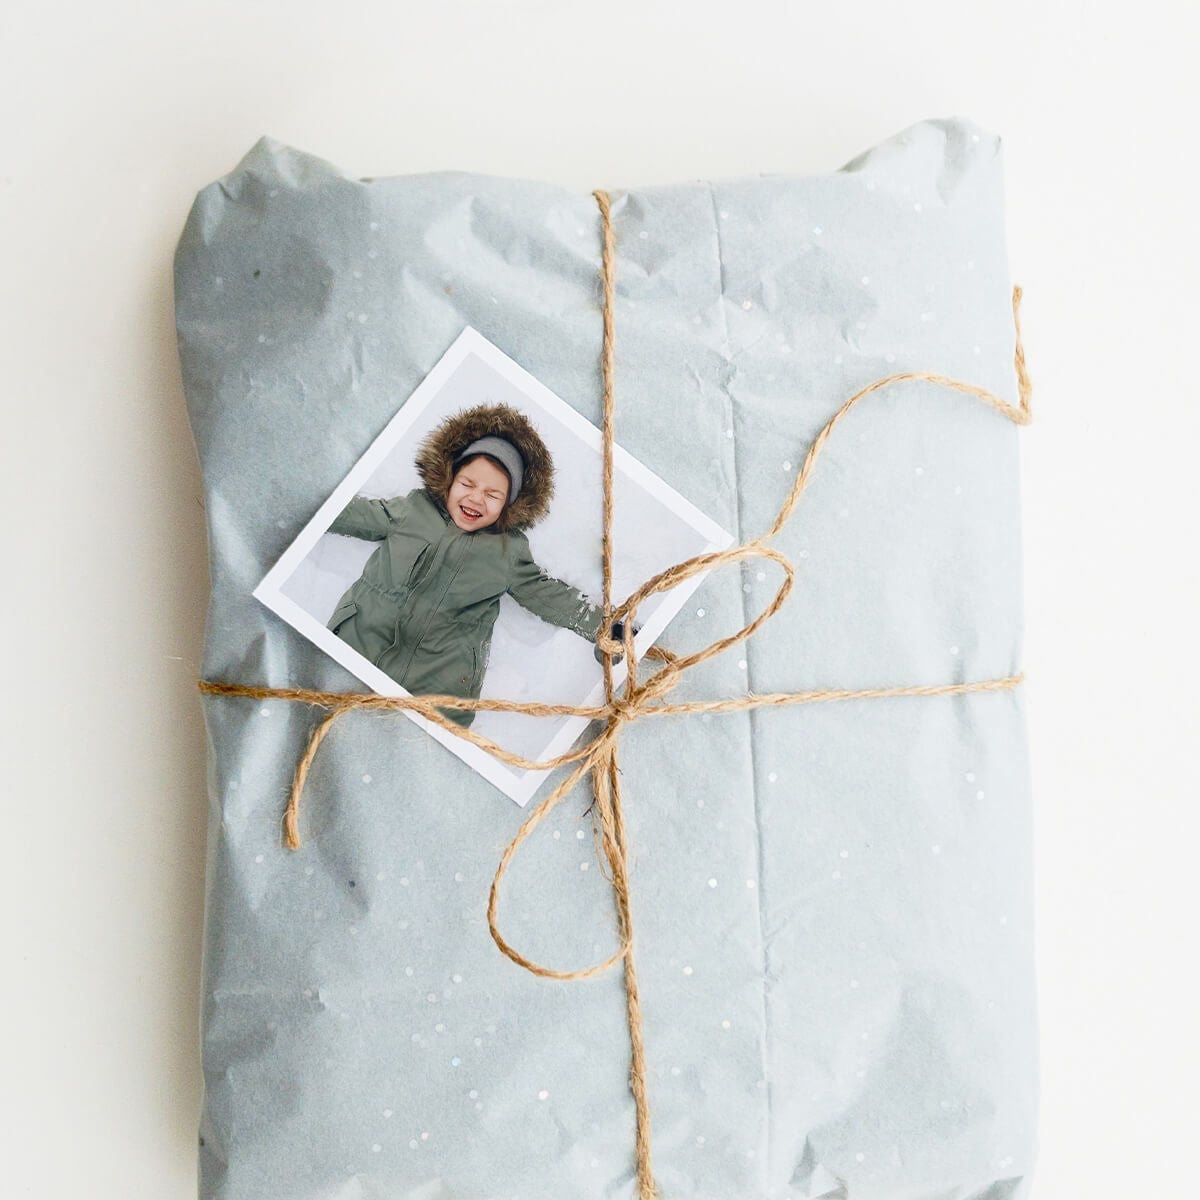 Artifact Uprising photo print secured to wrapped gift with twine